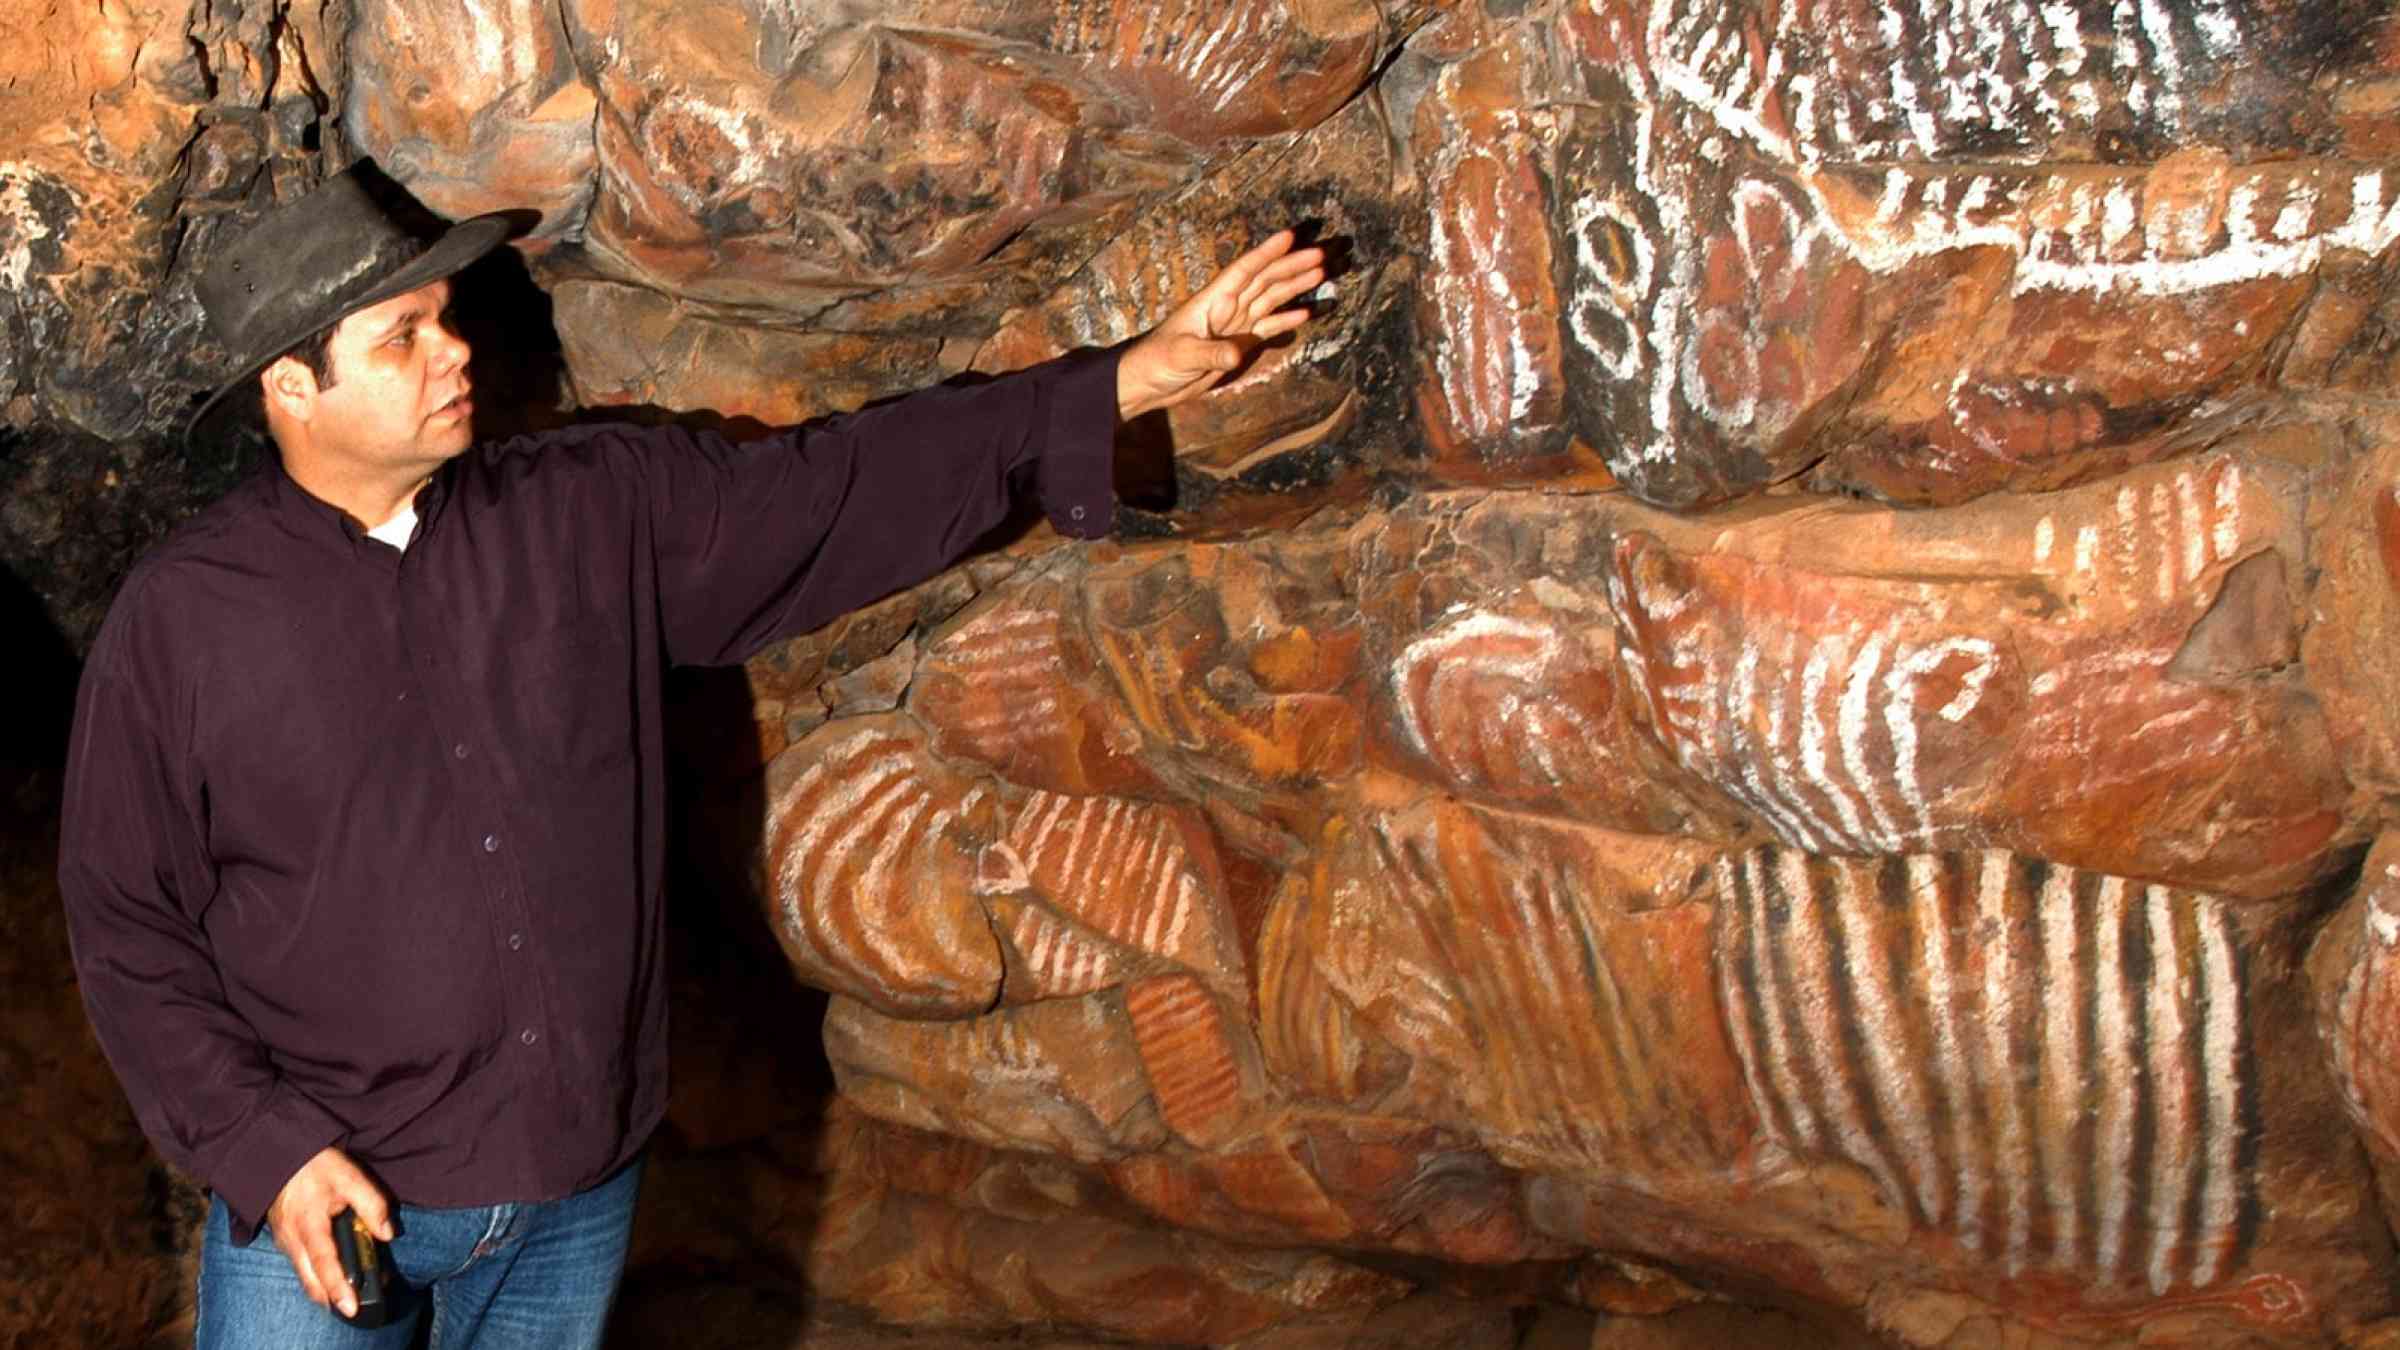 This image shows two people inspecting indigenous rock art in Australia that is threatened by climate change.